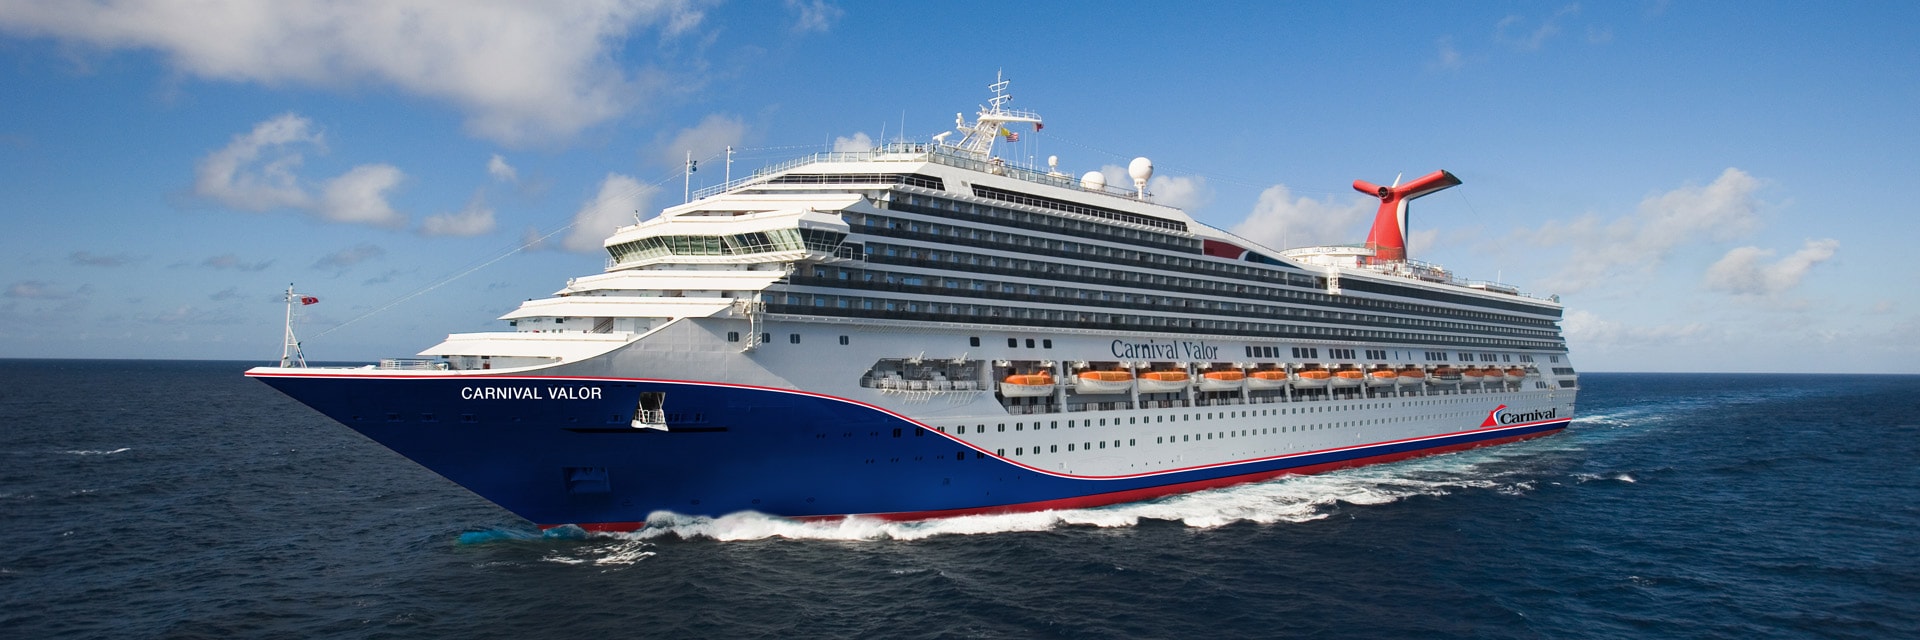 Cruises from New Orleans, New Orleans Cruises